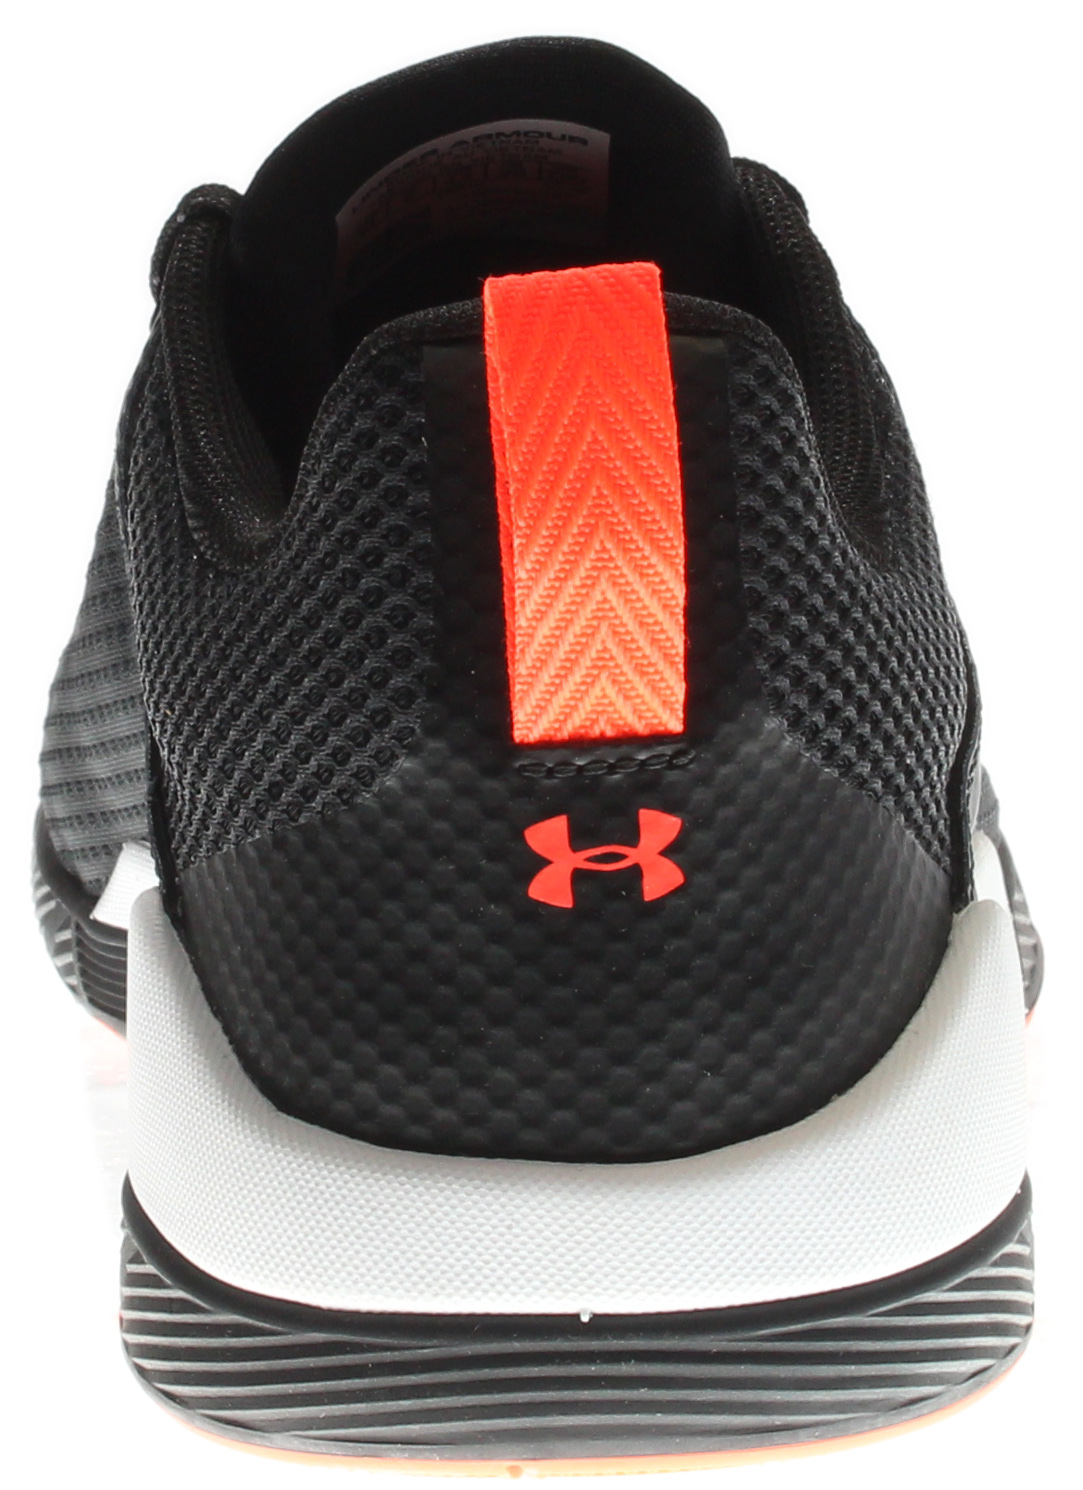 Under Armour Men's Charged Legend Running Shoes 